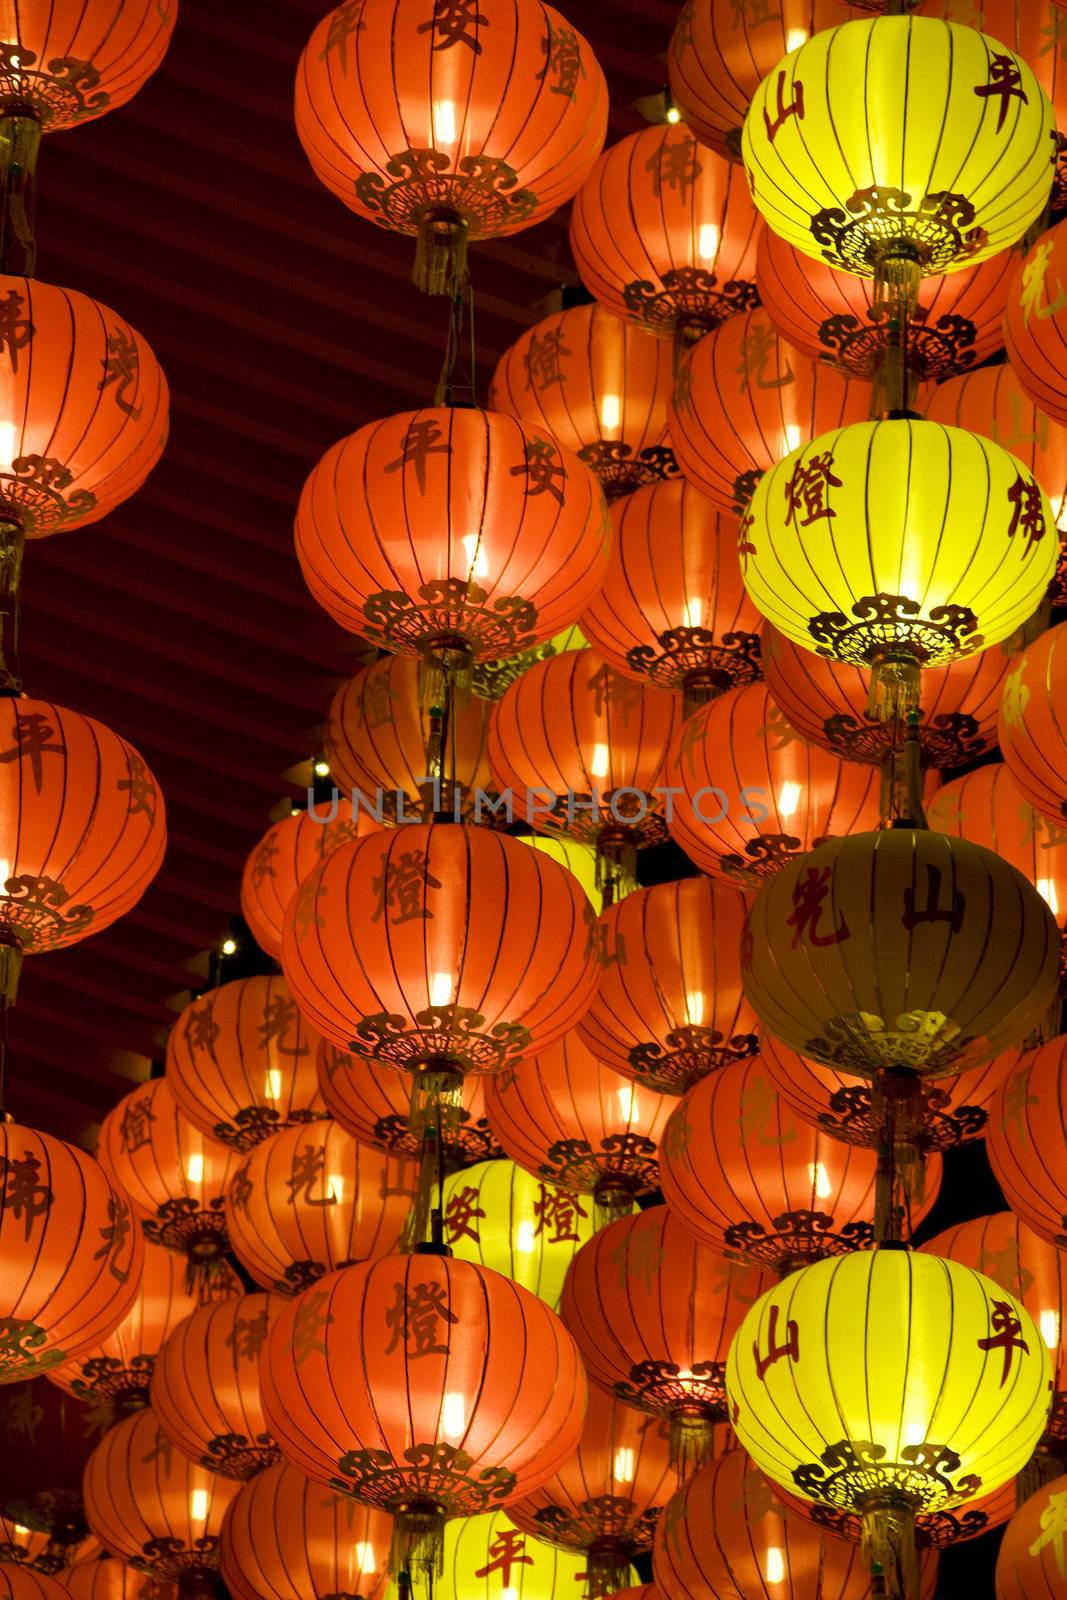 Night image of Chinese New Year lanterns at the Dong Zen Chinese Temple in Malaysia during the Chinese New Year celebration on 26th January 2009.